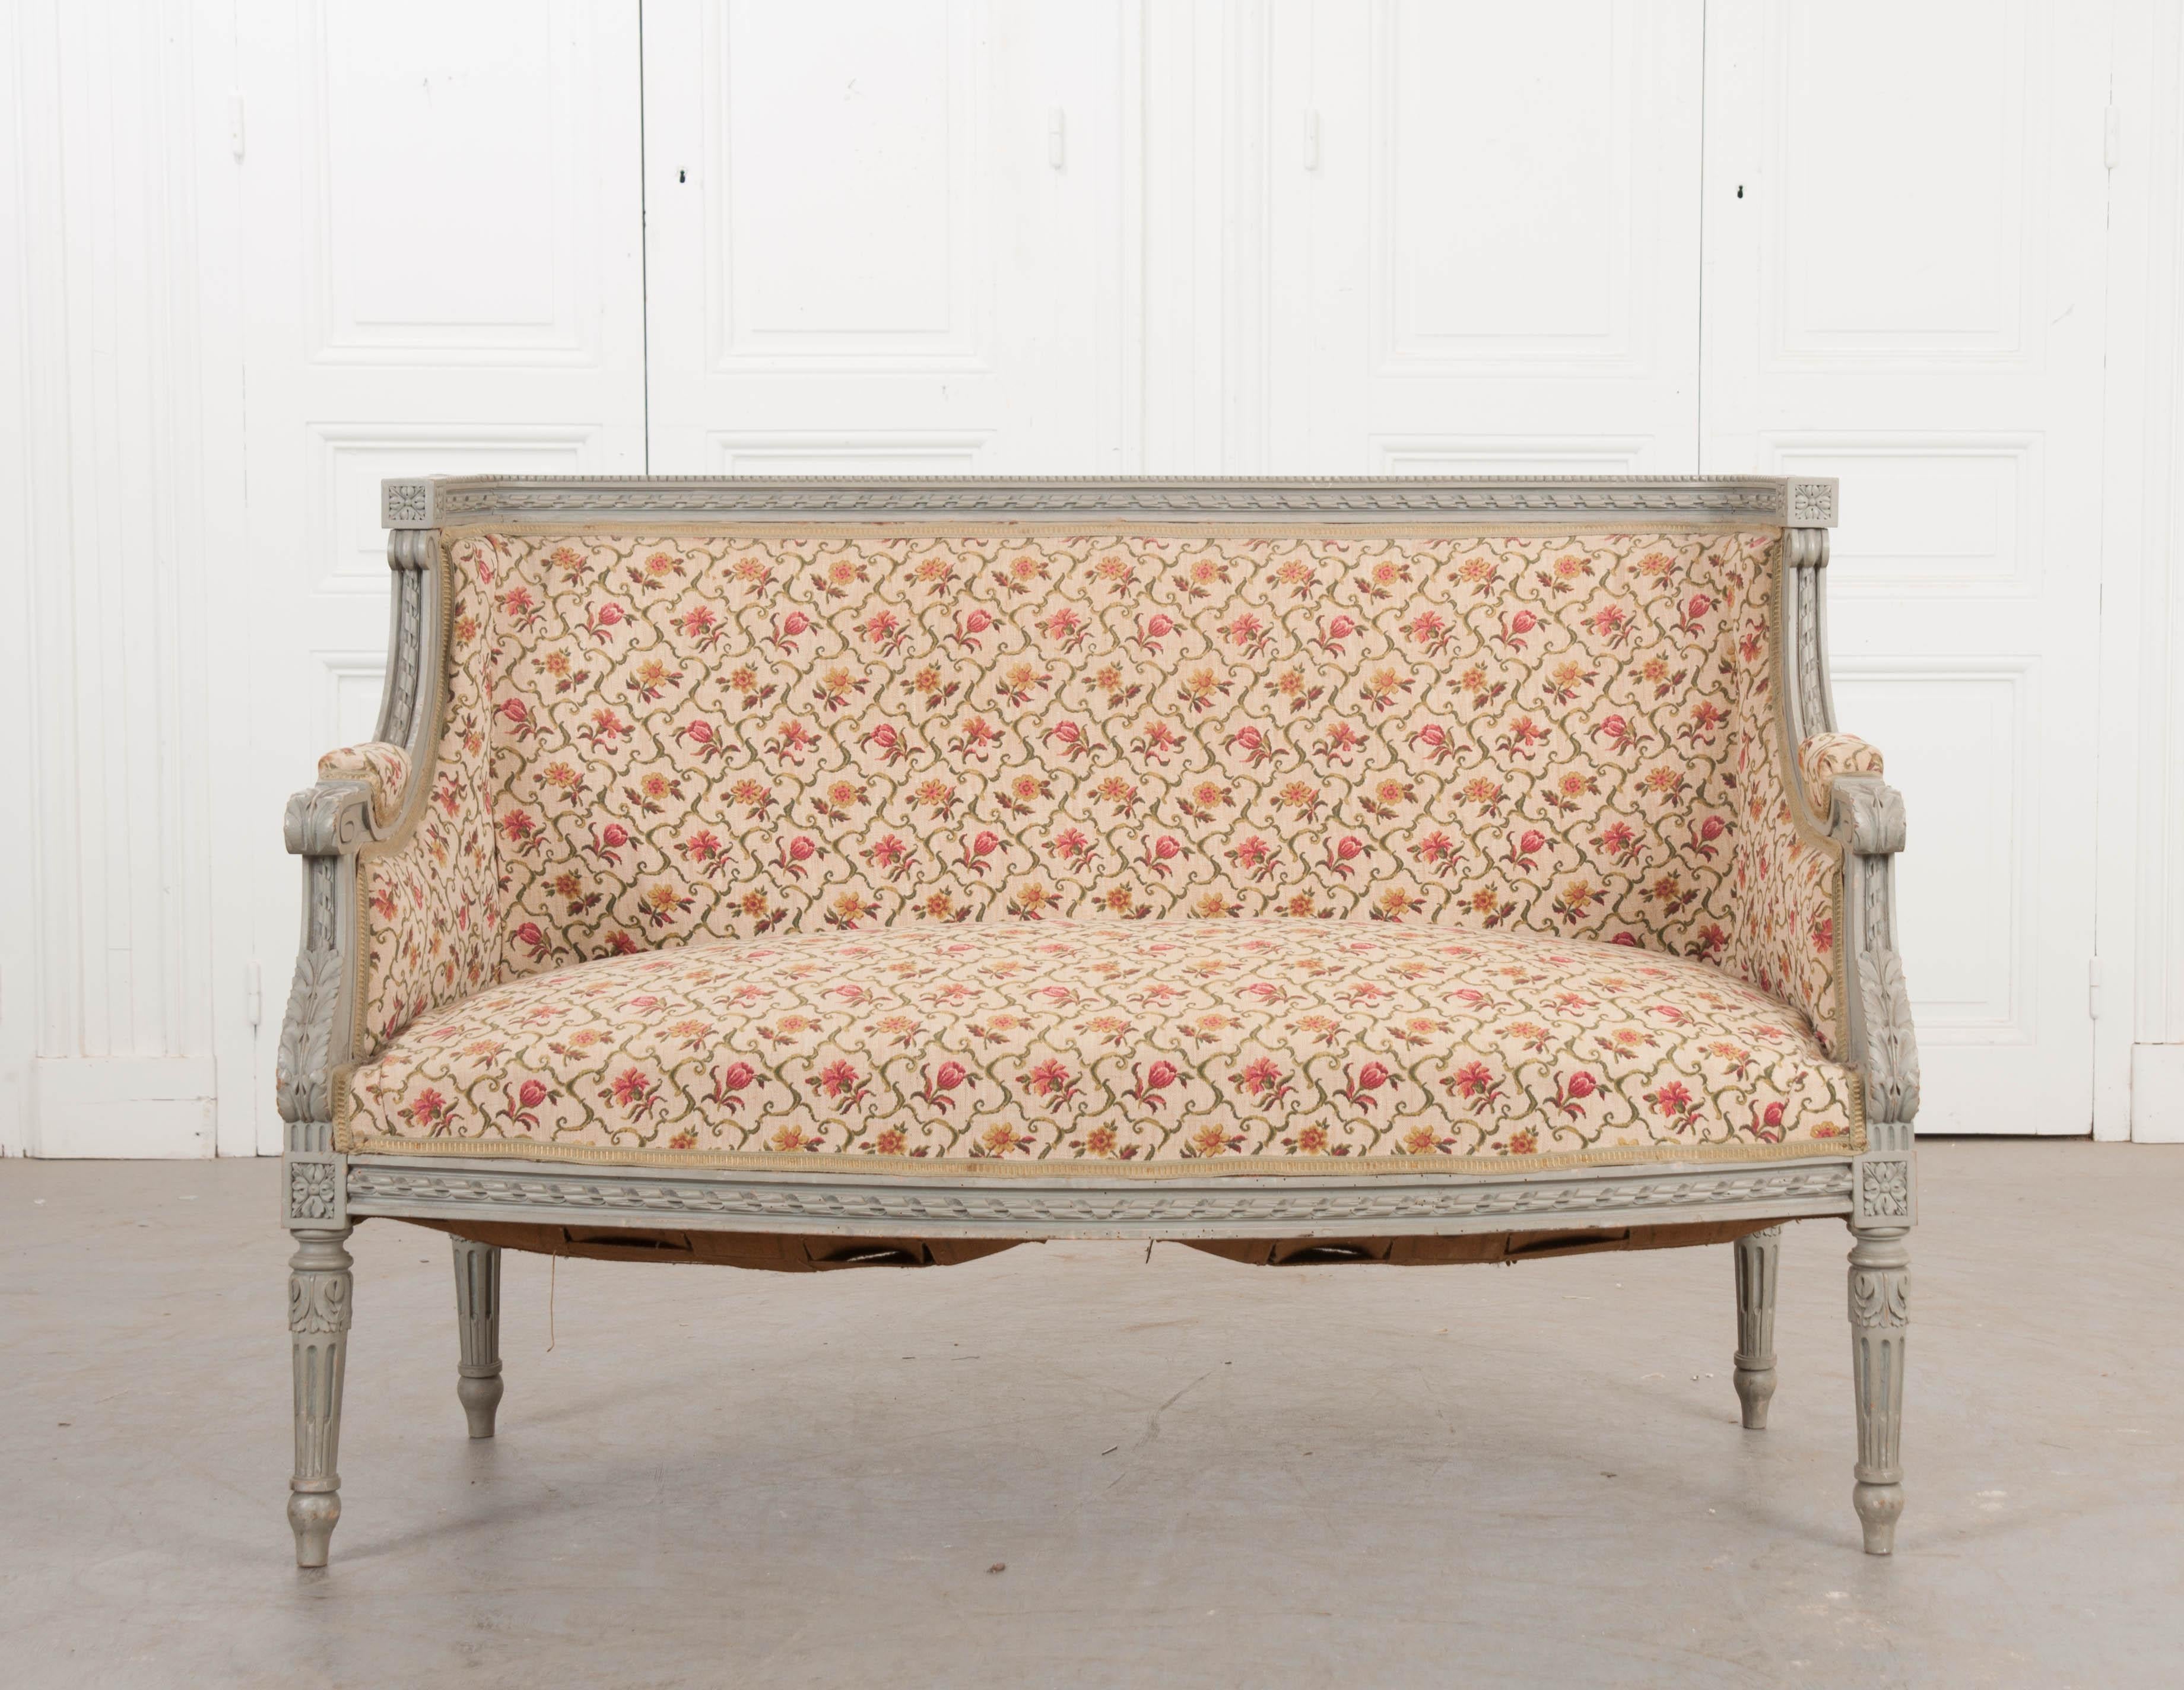 This lovely Louis XVI style carved and painted canapé, circa 1880s, is from France and is painted a soft dove-grey. The 